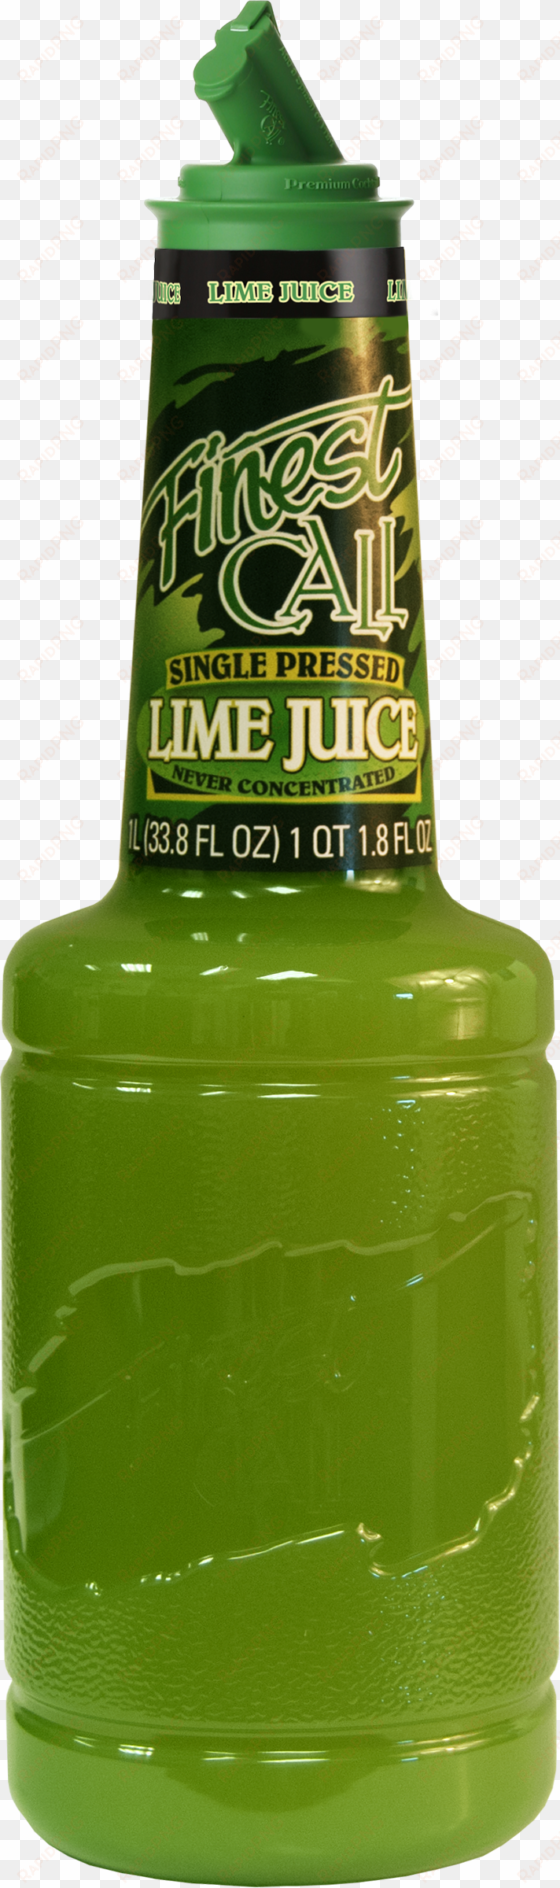 check out other recipes using - finest call single pressed lime juice